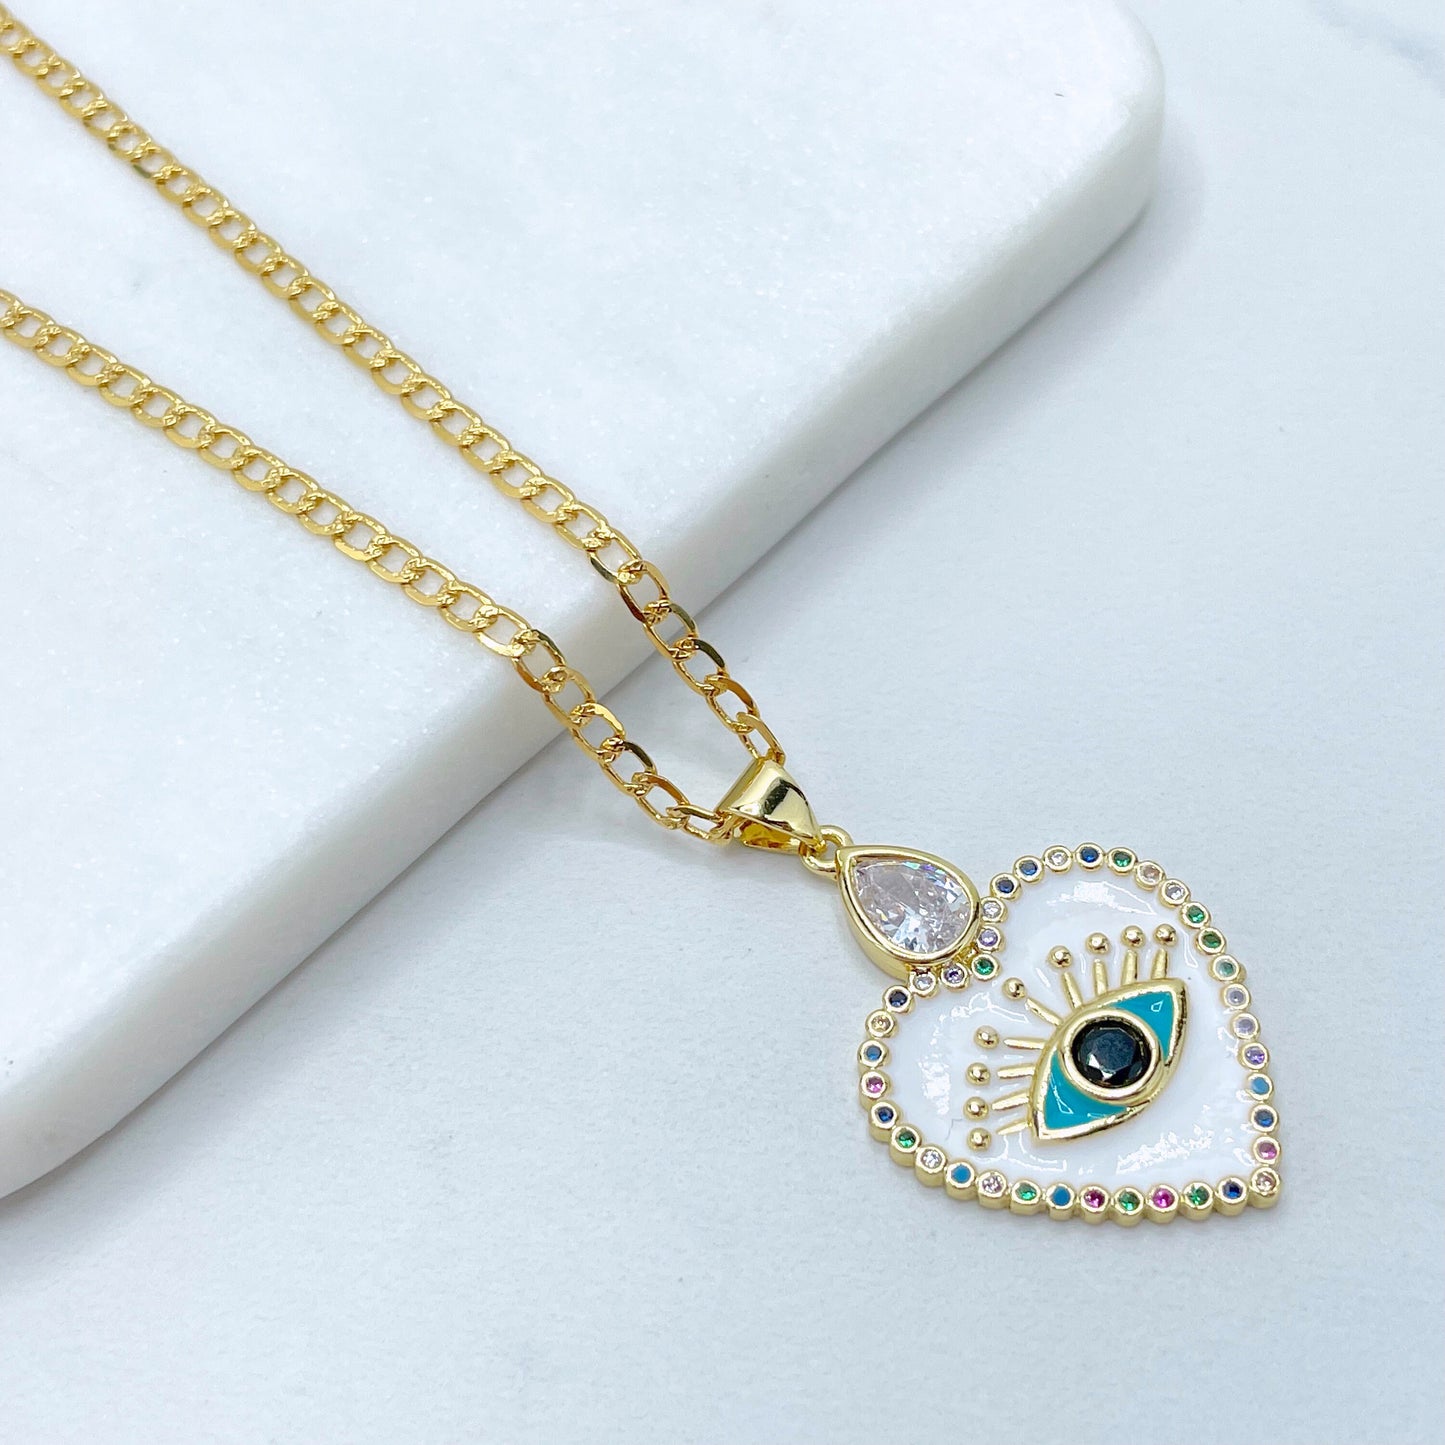 18k Gold Filled 2mm Curb Link Chain, White Enamel with Colored Micro CZ Evil Eyes Heart Shape Earrings and Charm, Wholesale Jewelry Supplies